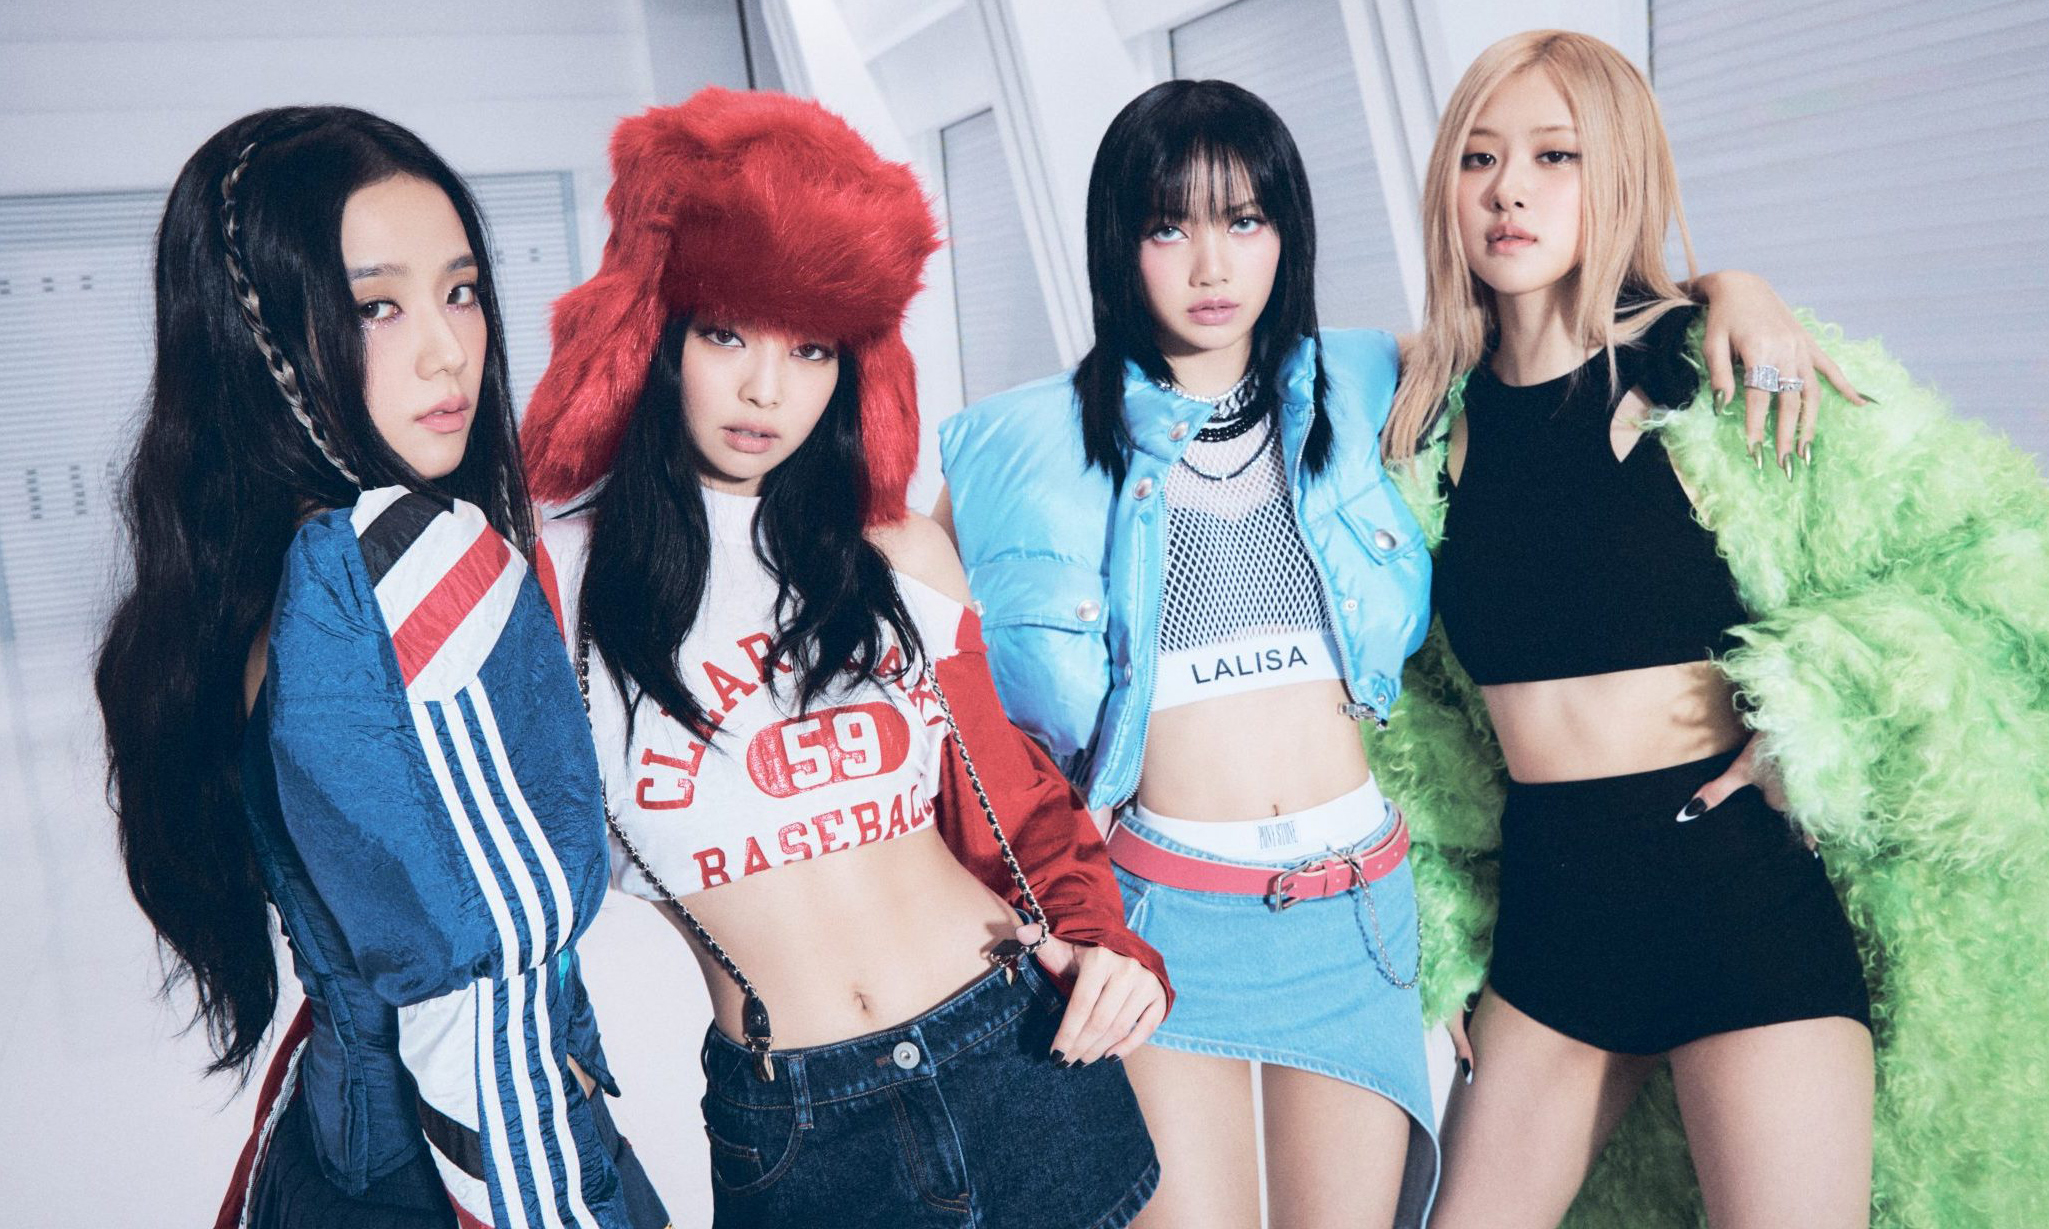 BLACKPINK's BORN PINK album sees them make history as first K-pop girl group to hit Number 1